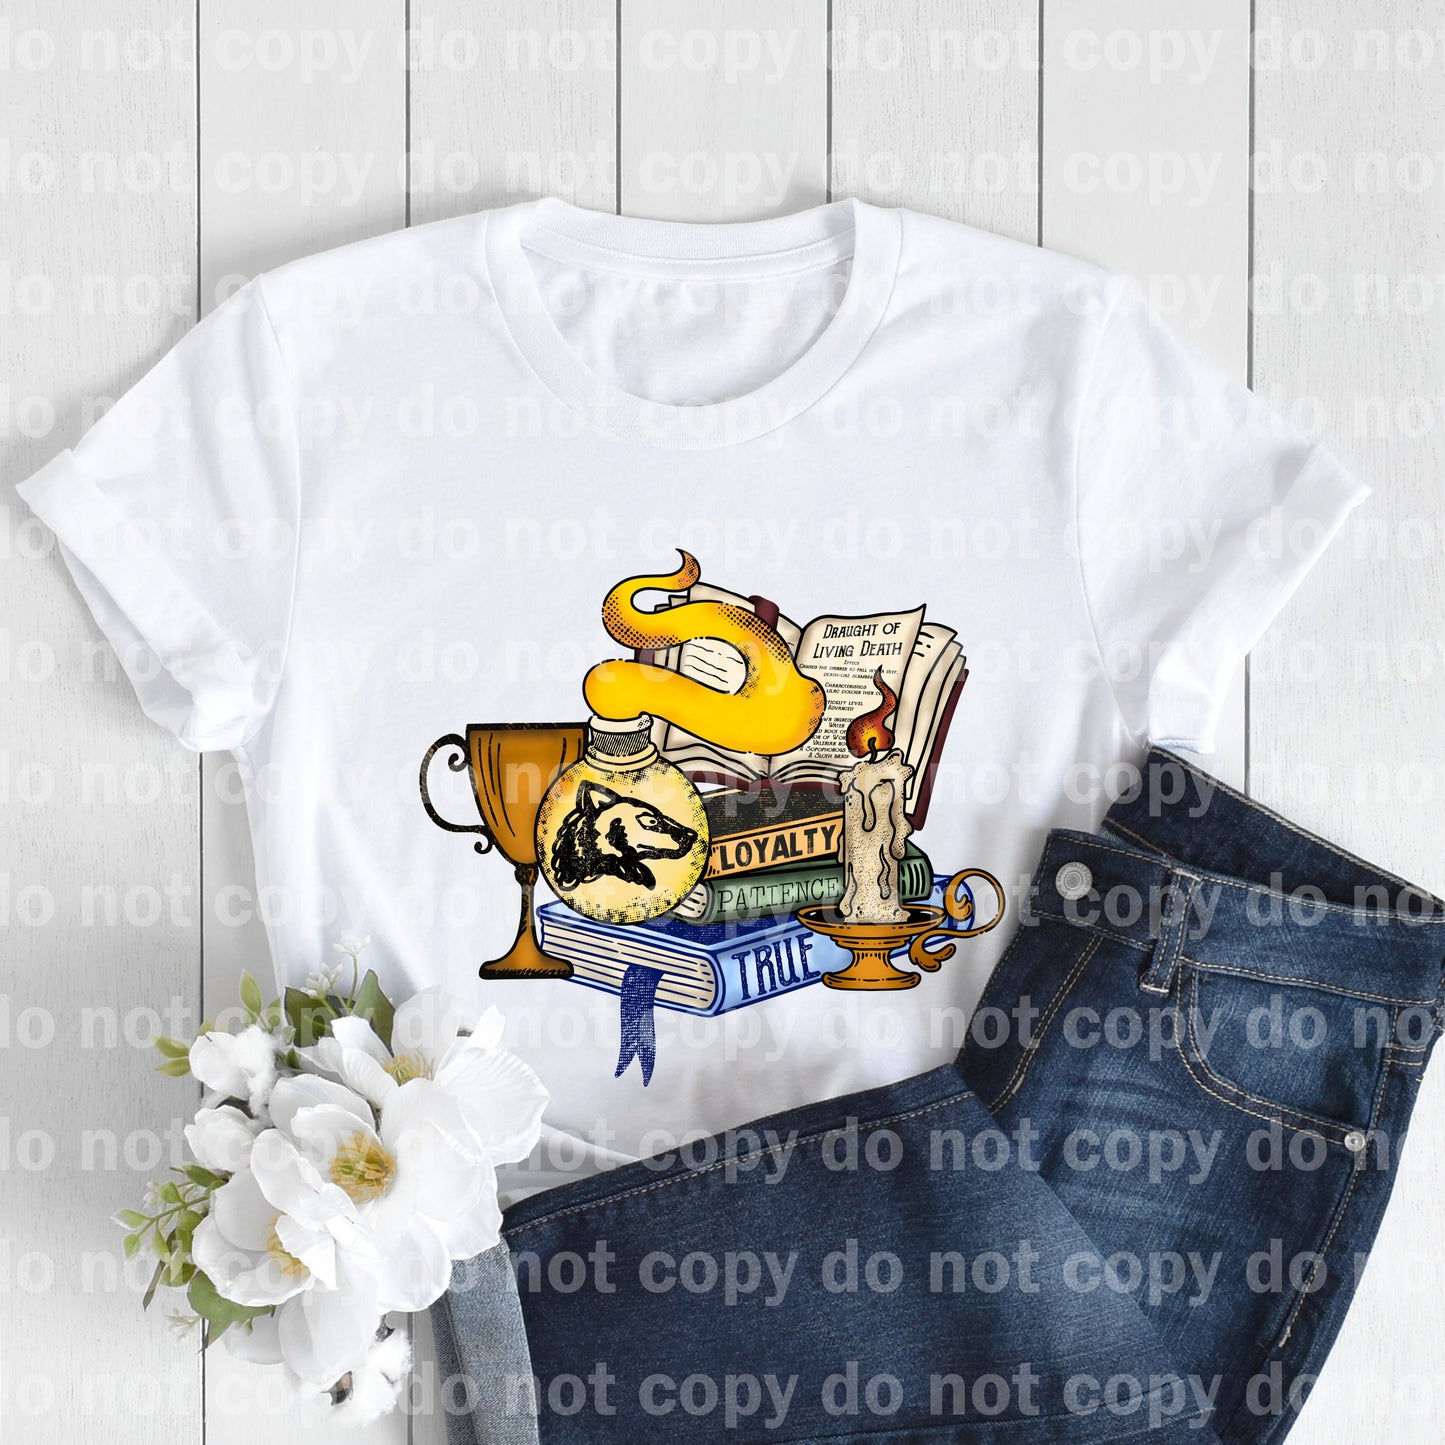 Badger No Label Loyalty Patience True Full Color/One Color Dream Print or Sublimation Print